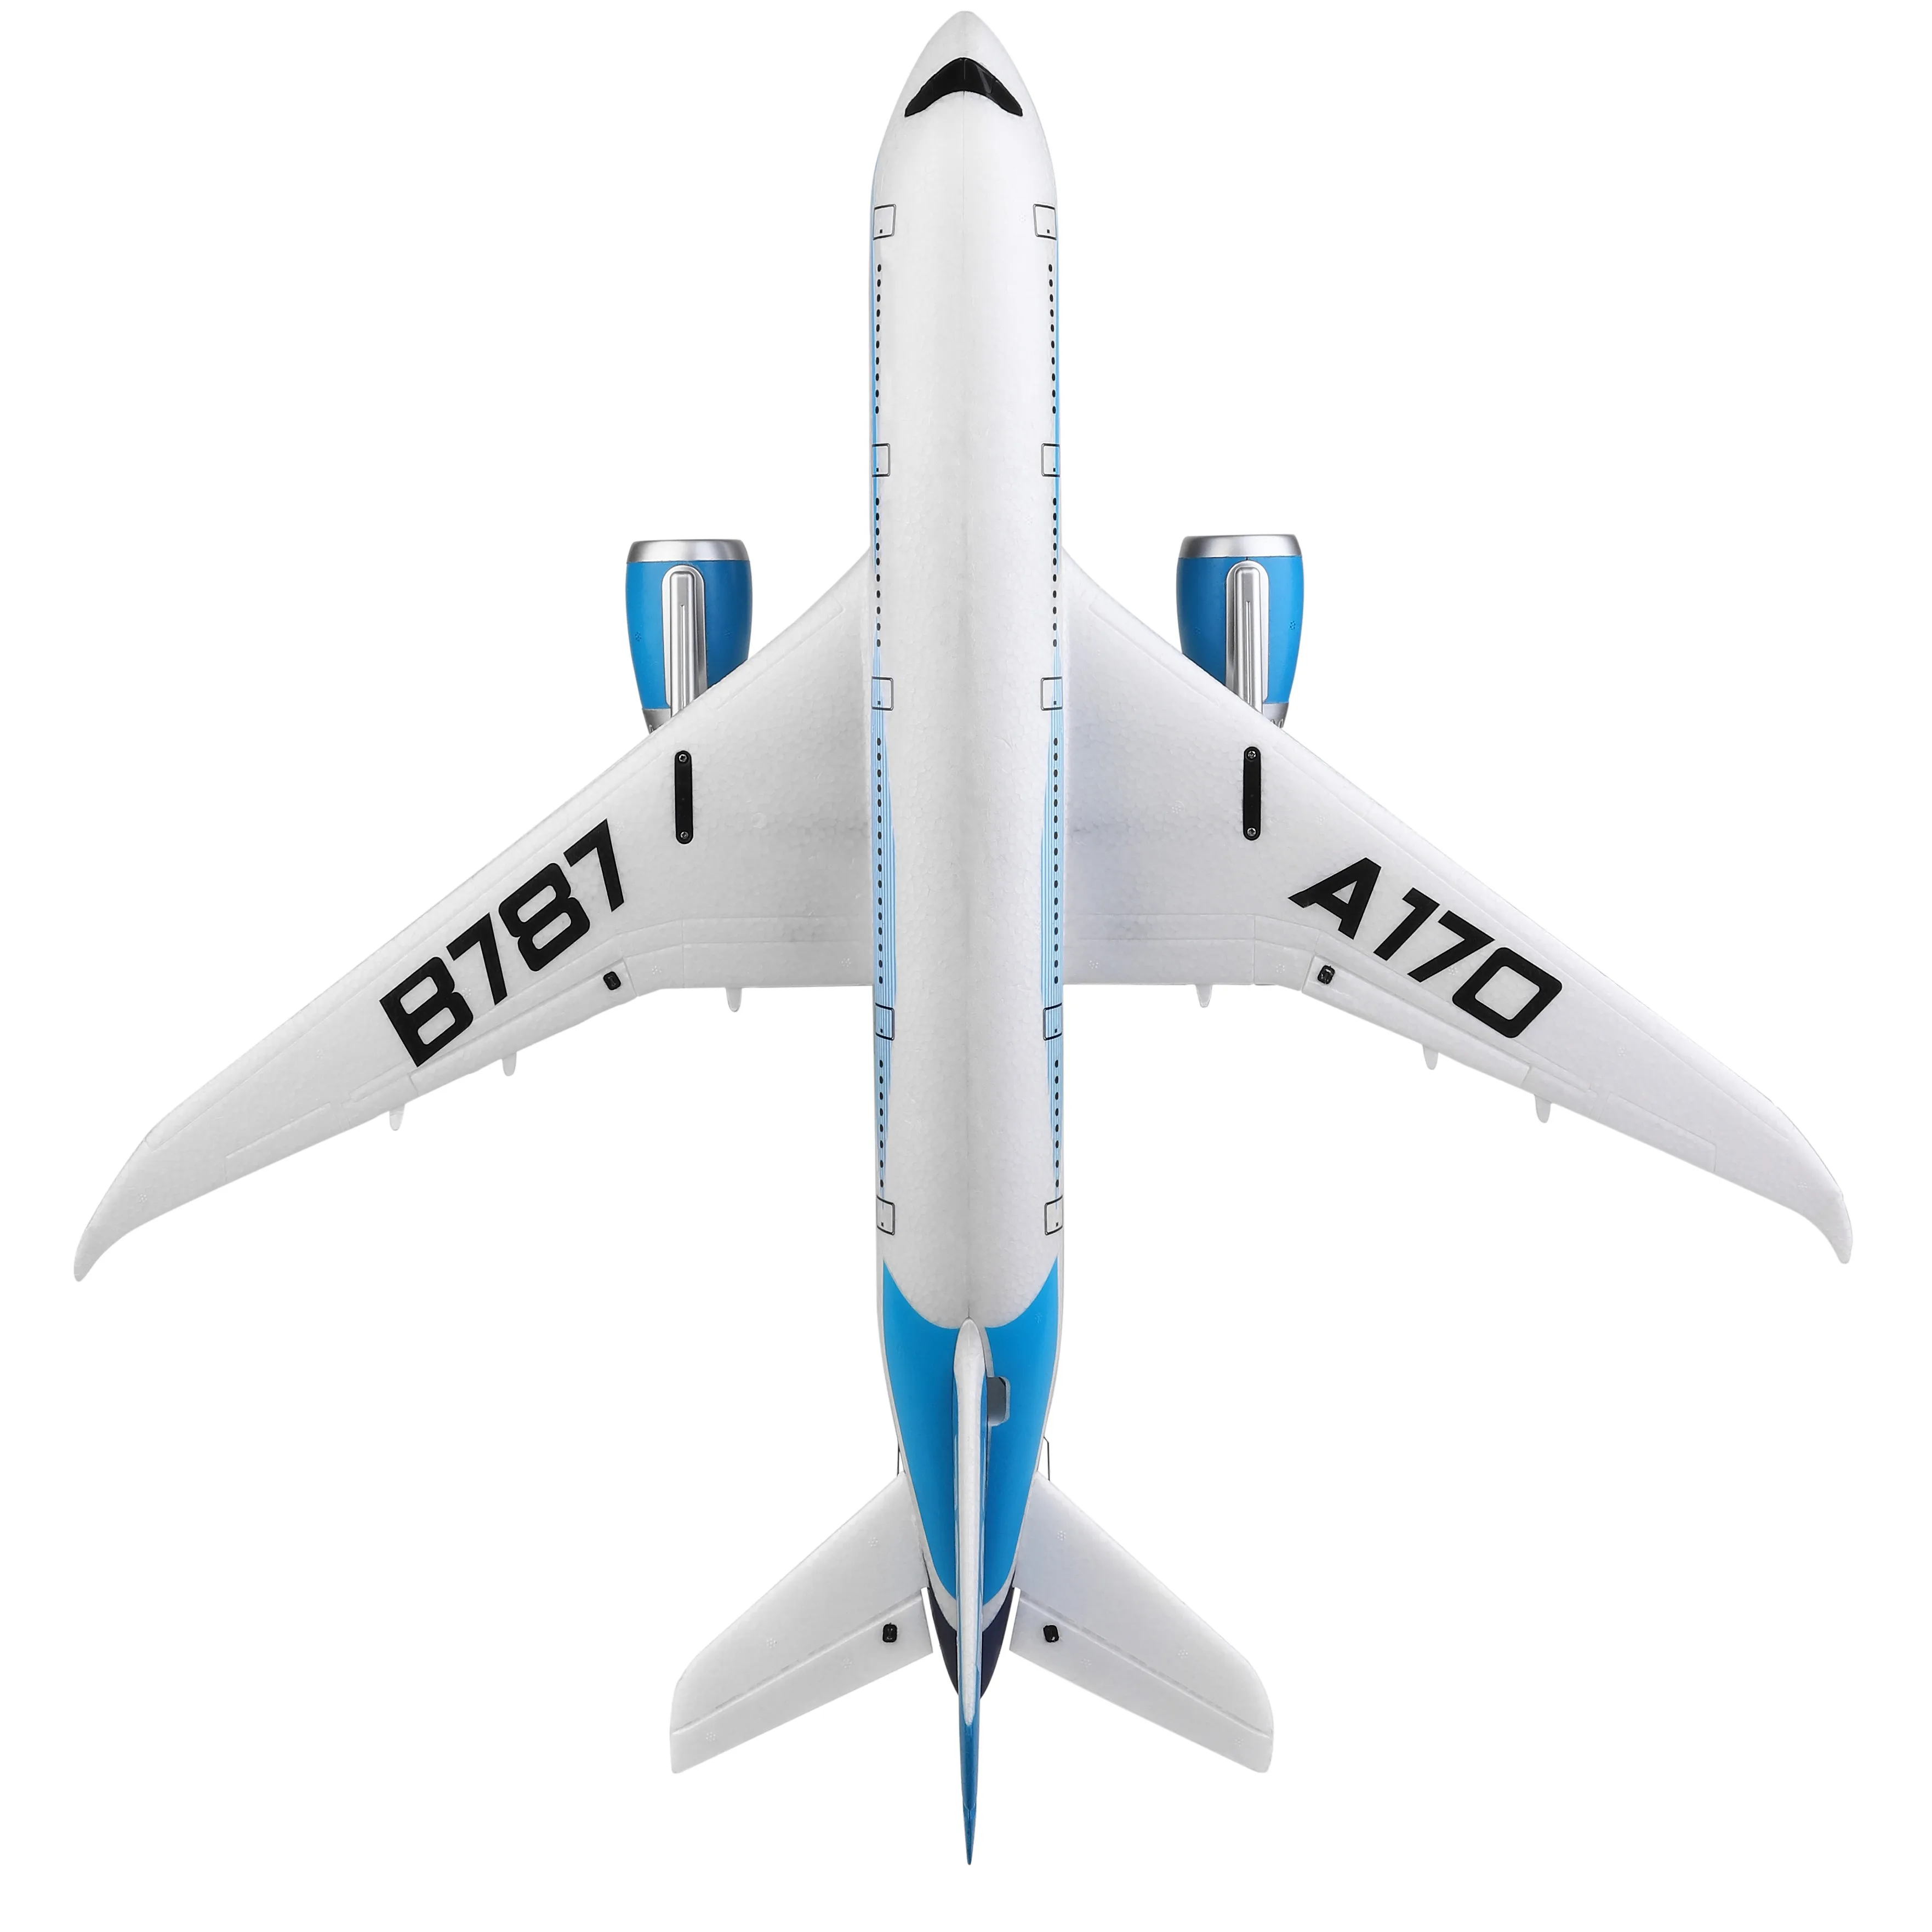 wltoys new rc plane brushless A170 4CH High Simulation airplane "Boeing 787"